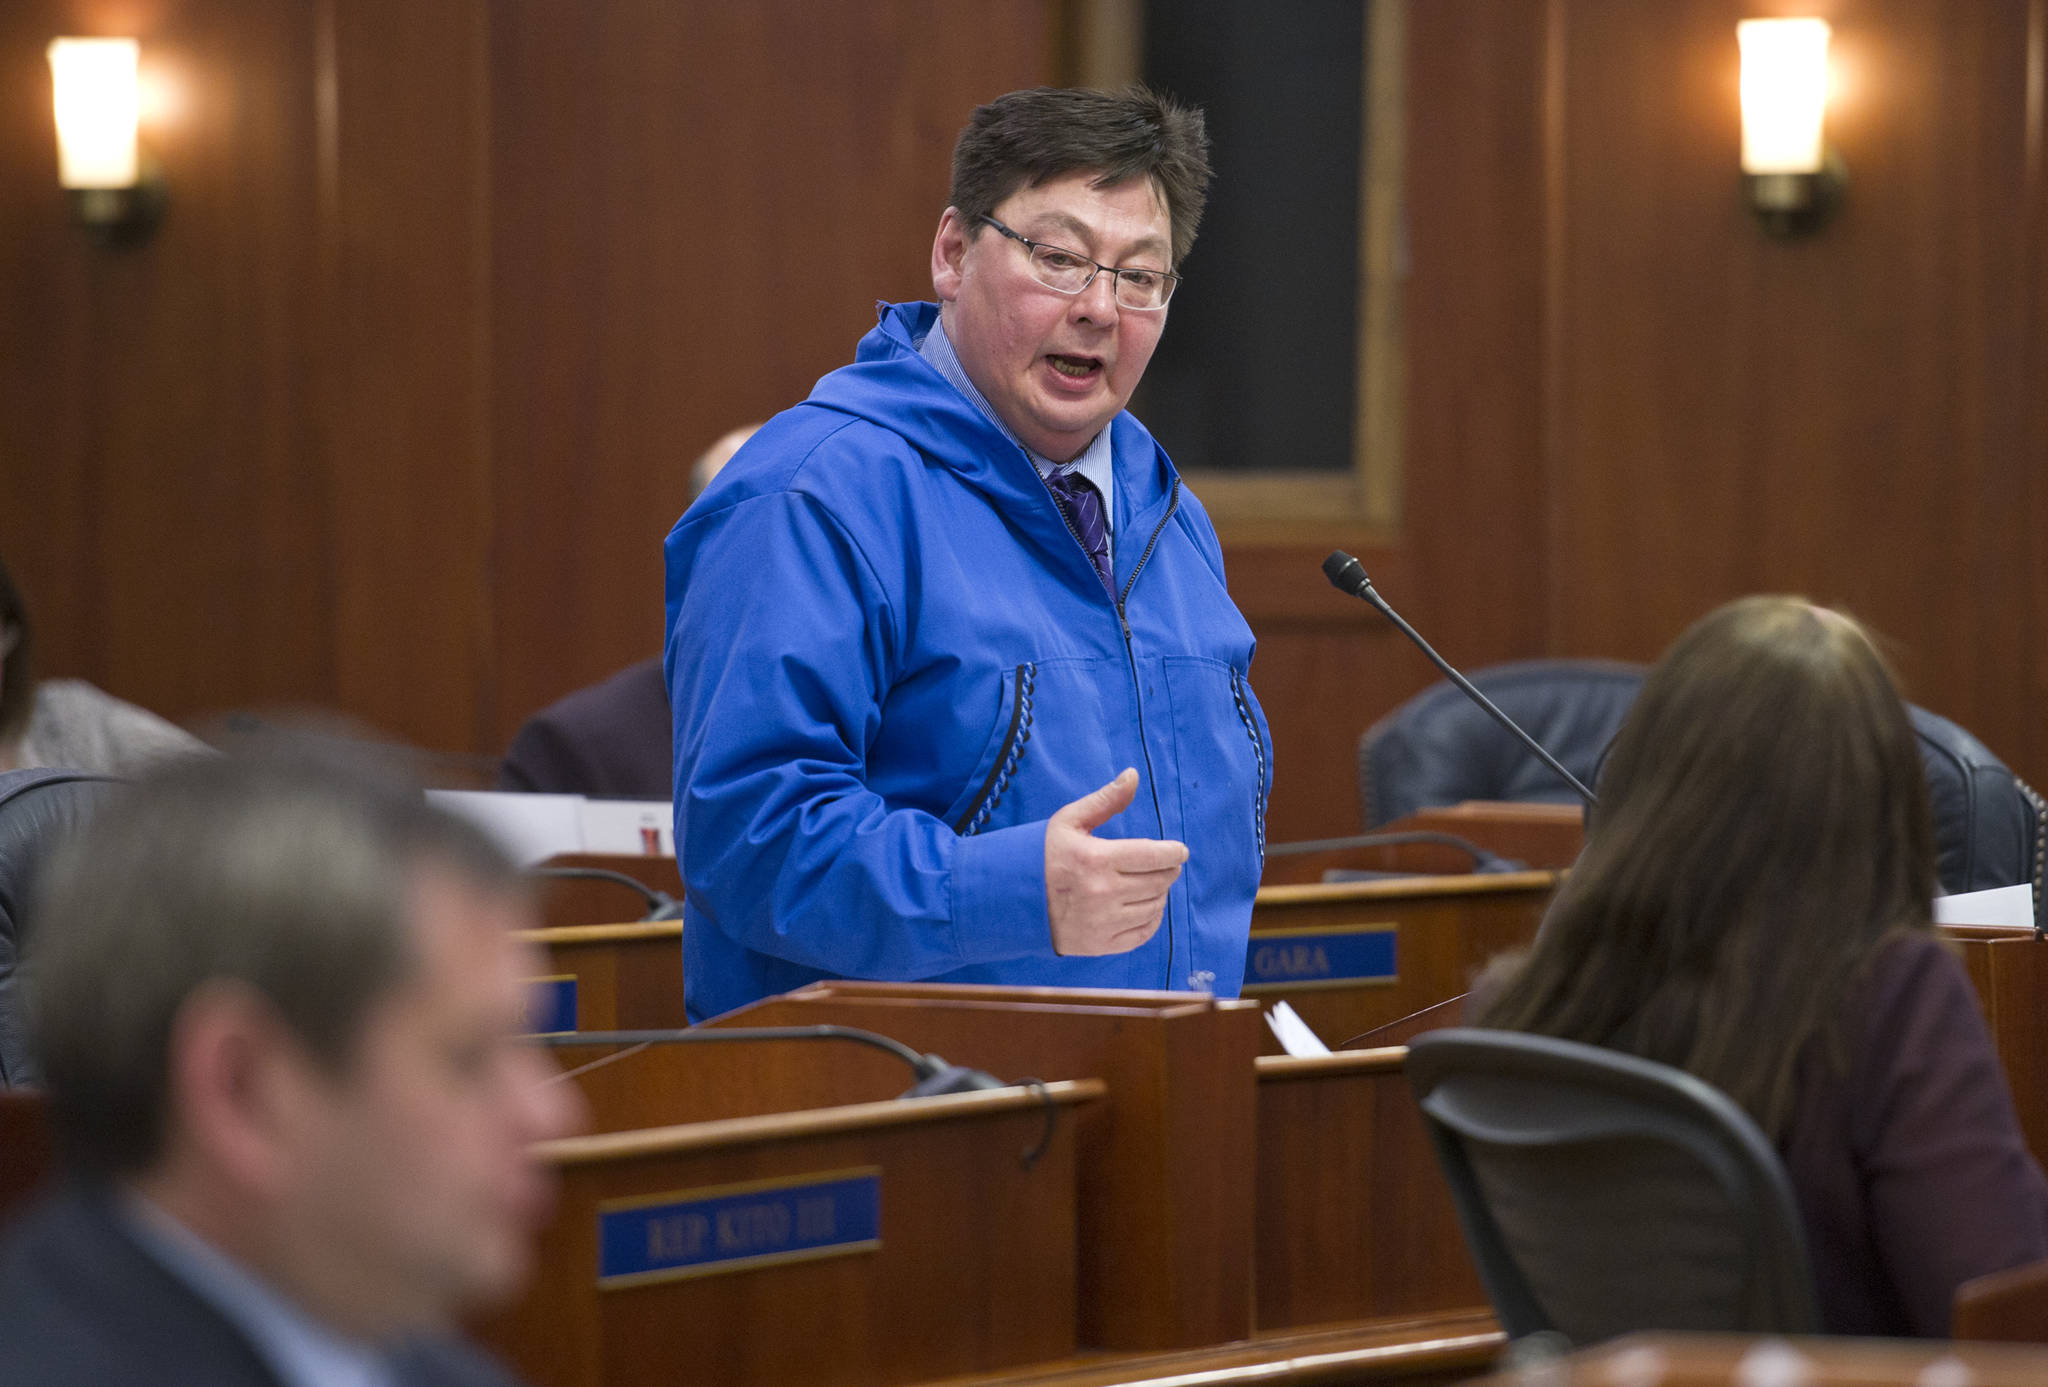 In this Feb. 15, 2017 photo, Rep. Dean Westlake, D-Kotzebue, speaks in support of his resolution to allow oil drilling in the Arctic National Wildlife Refuge during a House floor session. Westlake resigned from the Legislature last month amid sexual misconduct allegations. (Michael Penn | Juneau Empire File)